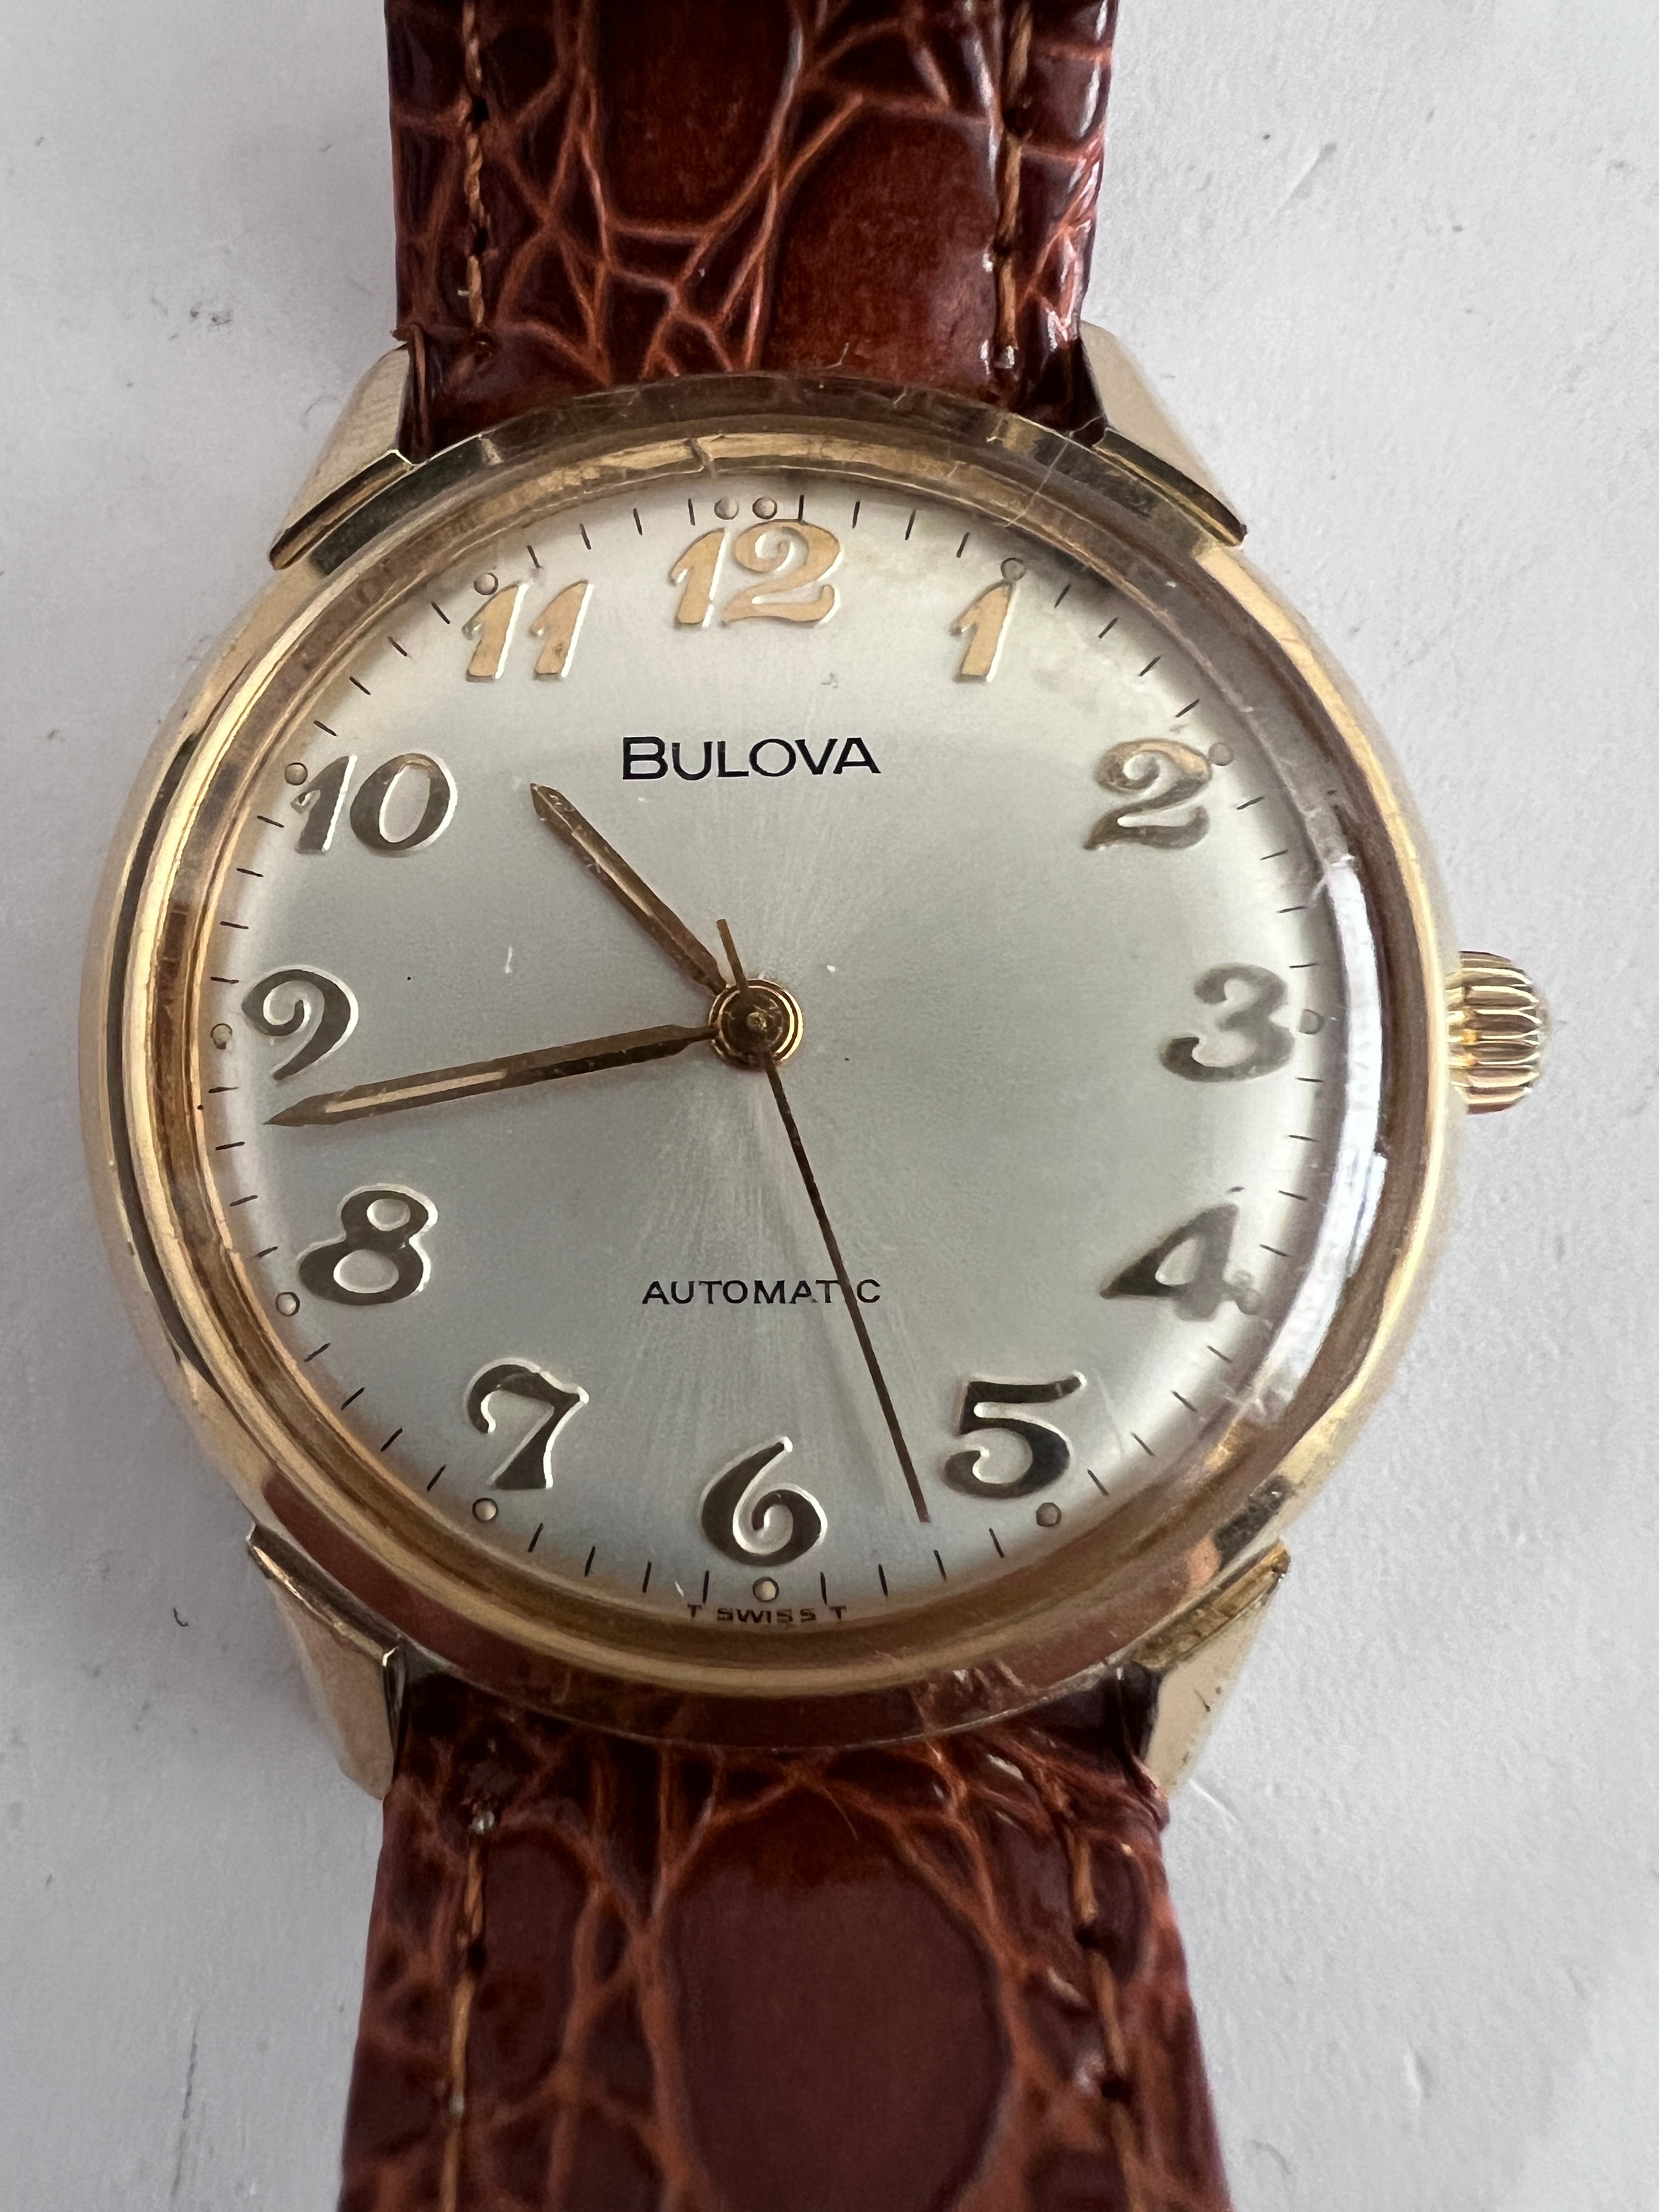 A 1974 vintage automatic Bulova wristwatch, gold plated on brown leather strap with silver face.